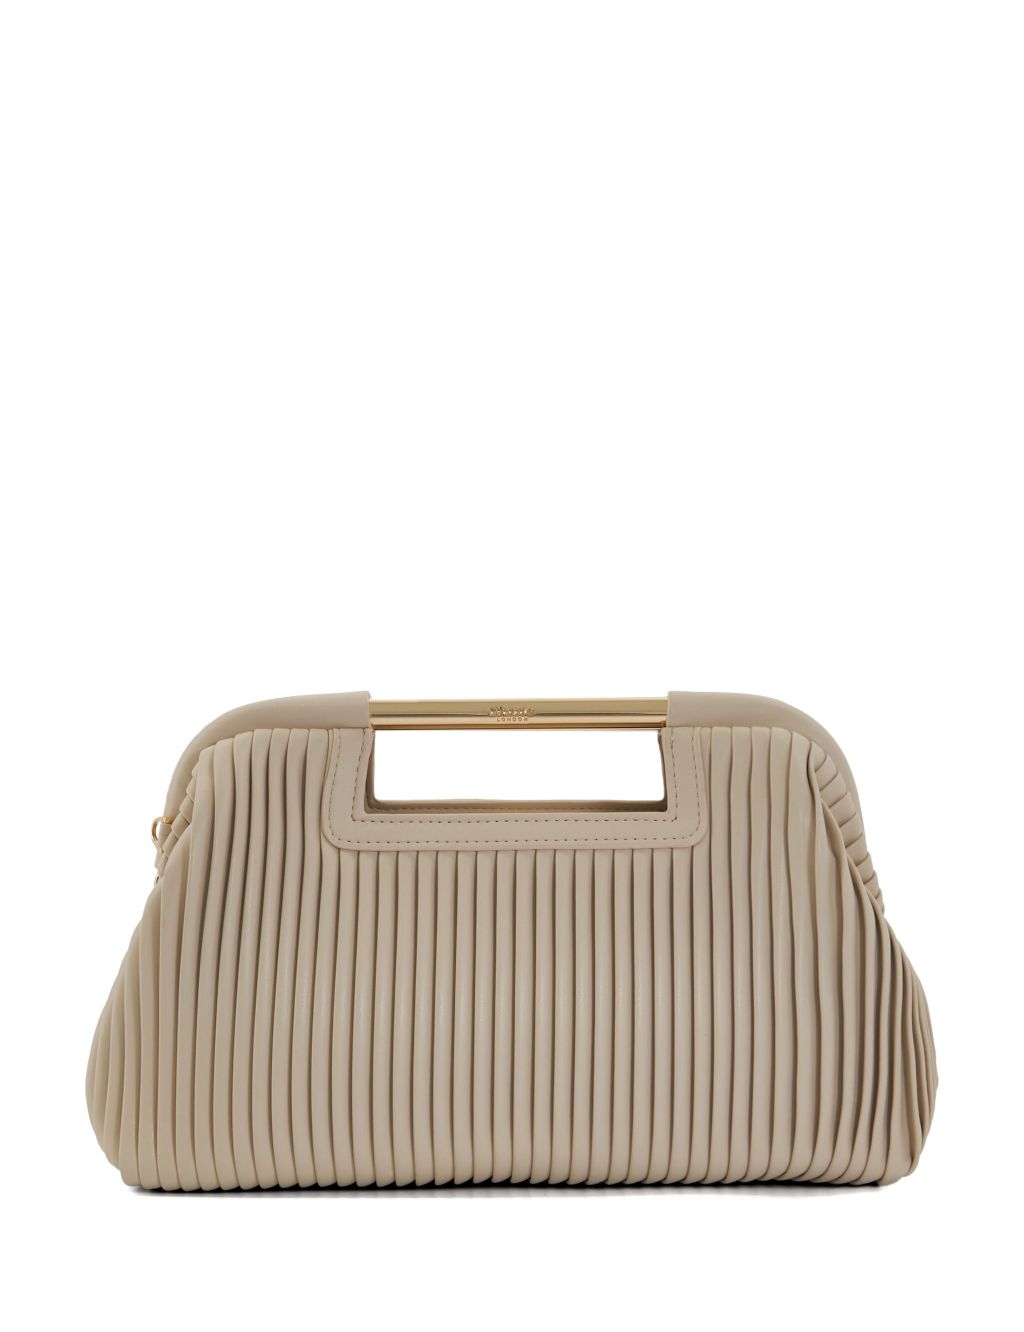 Pleated Chain Strap Clutch Bag image 3